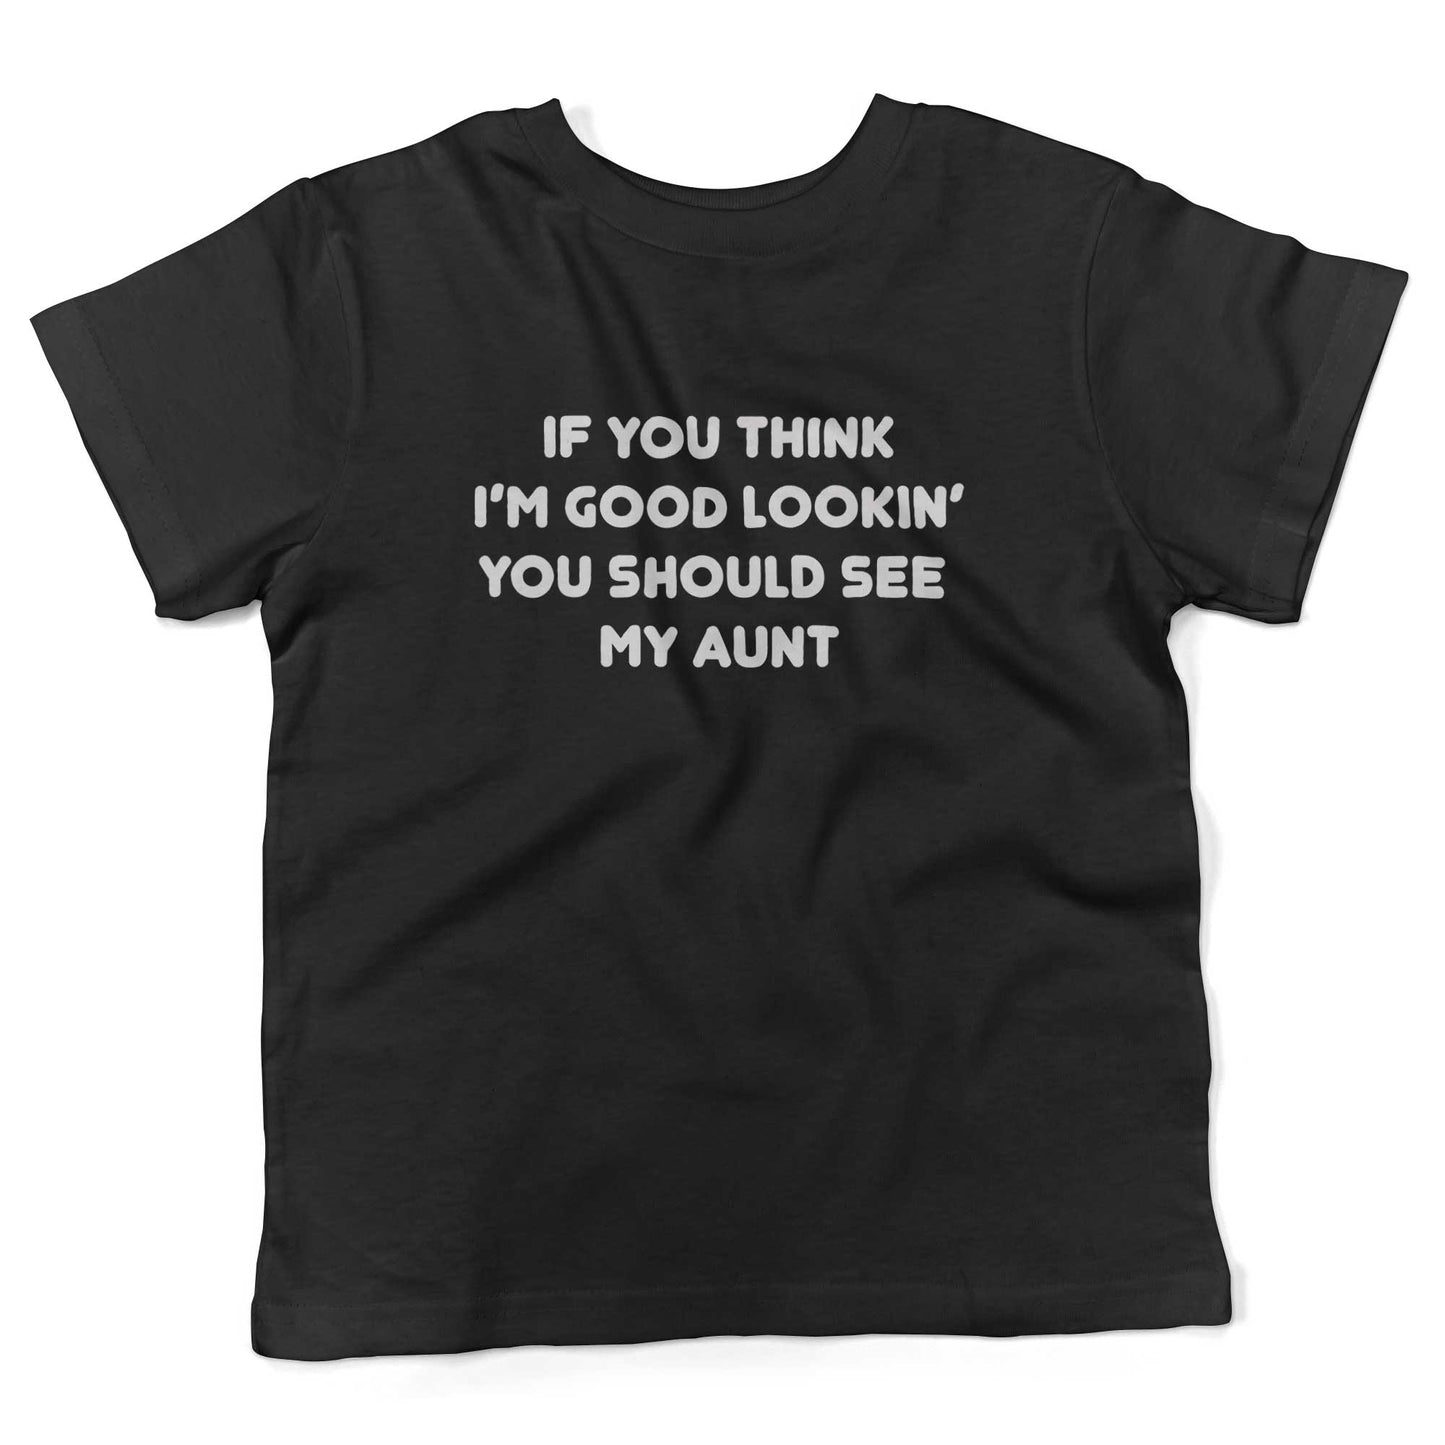 If You Think I'm Good Lookin' You Should See My Aunt Toddler Shirt-Organic Black-2T